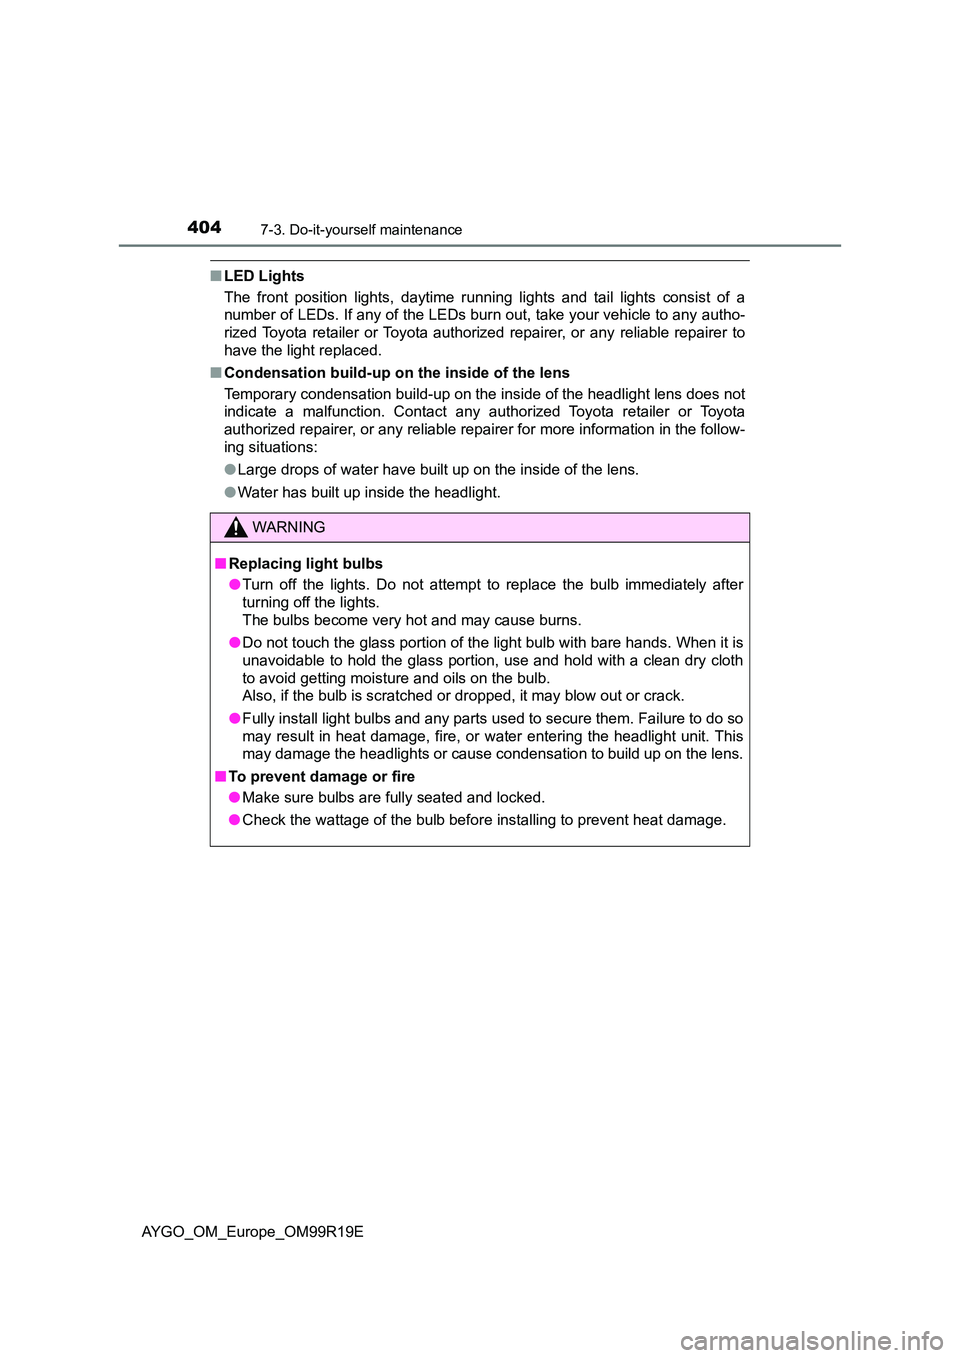 TOYOTA AYGO 2019  Owners Manual (in English) 4047-3. Do-it-yourself maintenance
AYGO_OM_Europe_OM99R19E
■LED Lights 
The front position lights, daytime running lights and tail lights consist of a 
number of LEDs. If any of the LEDs burn out, t